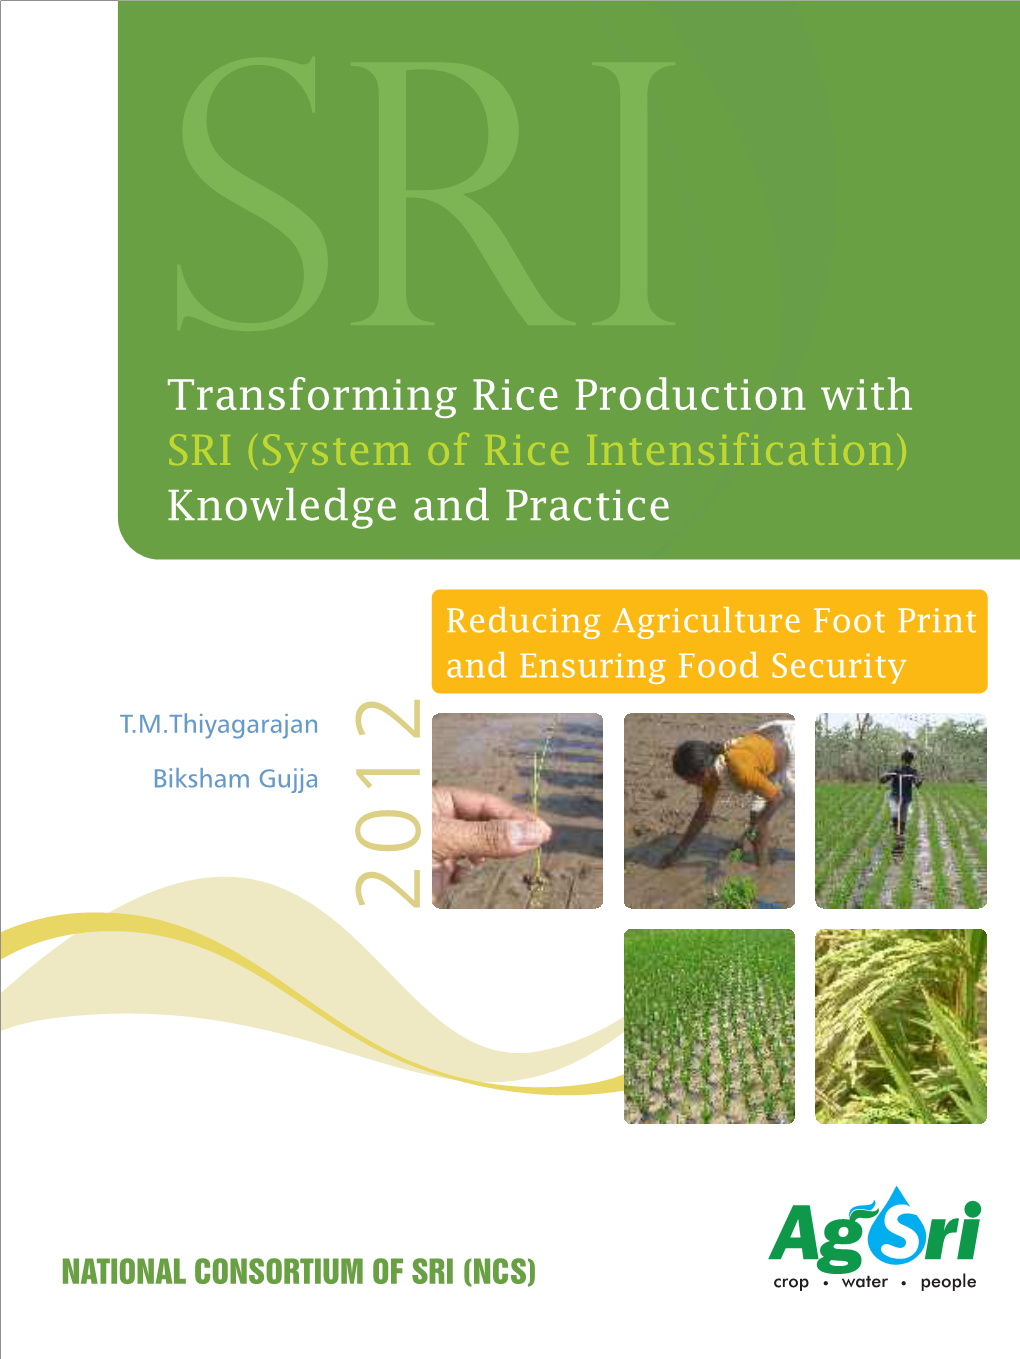 Transforming Rice Production with SRI (System of Rice Intensification) Knowledge and Practice